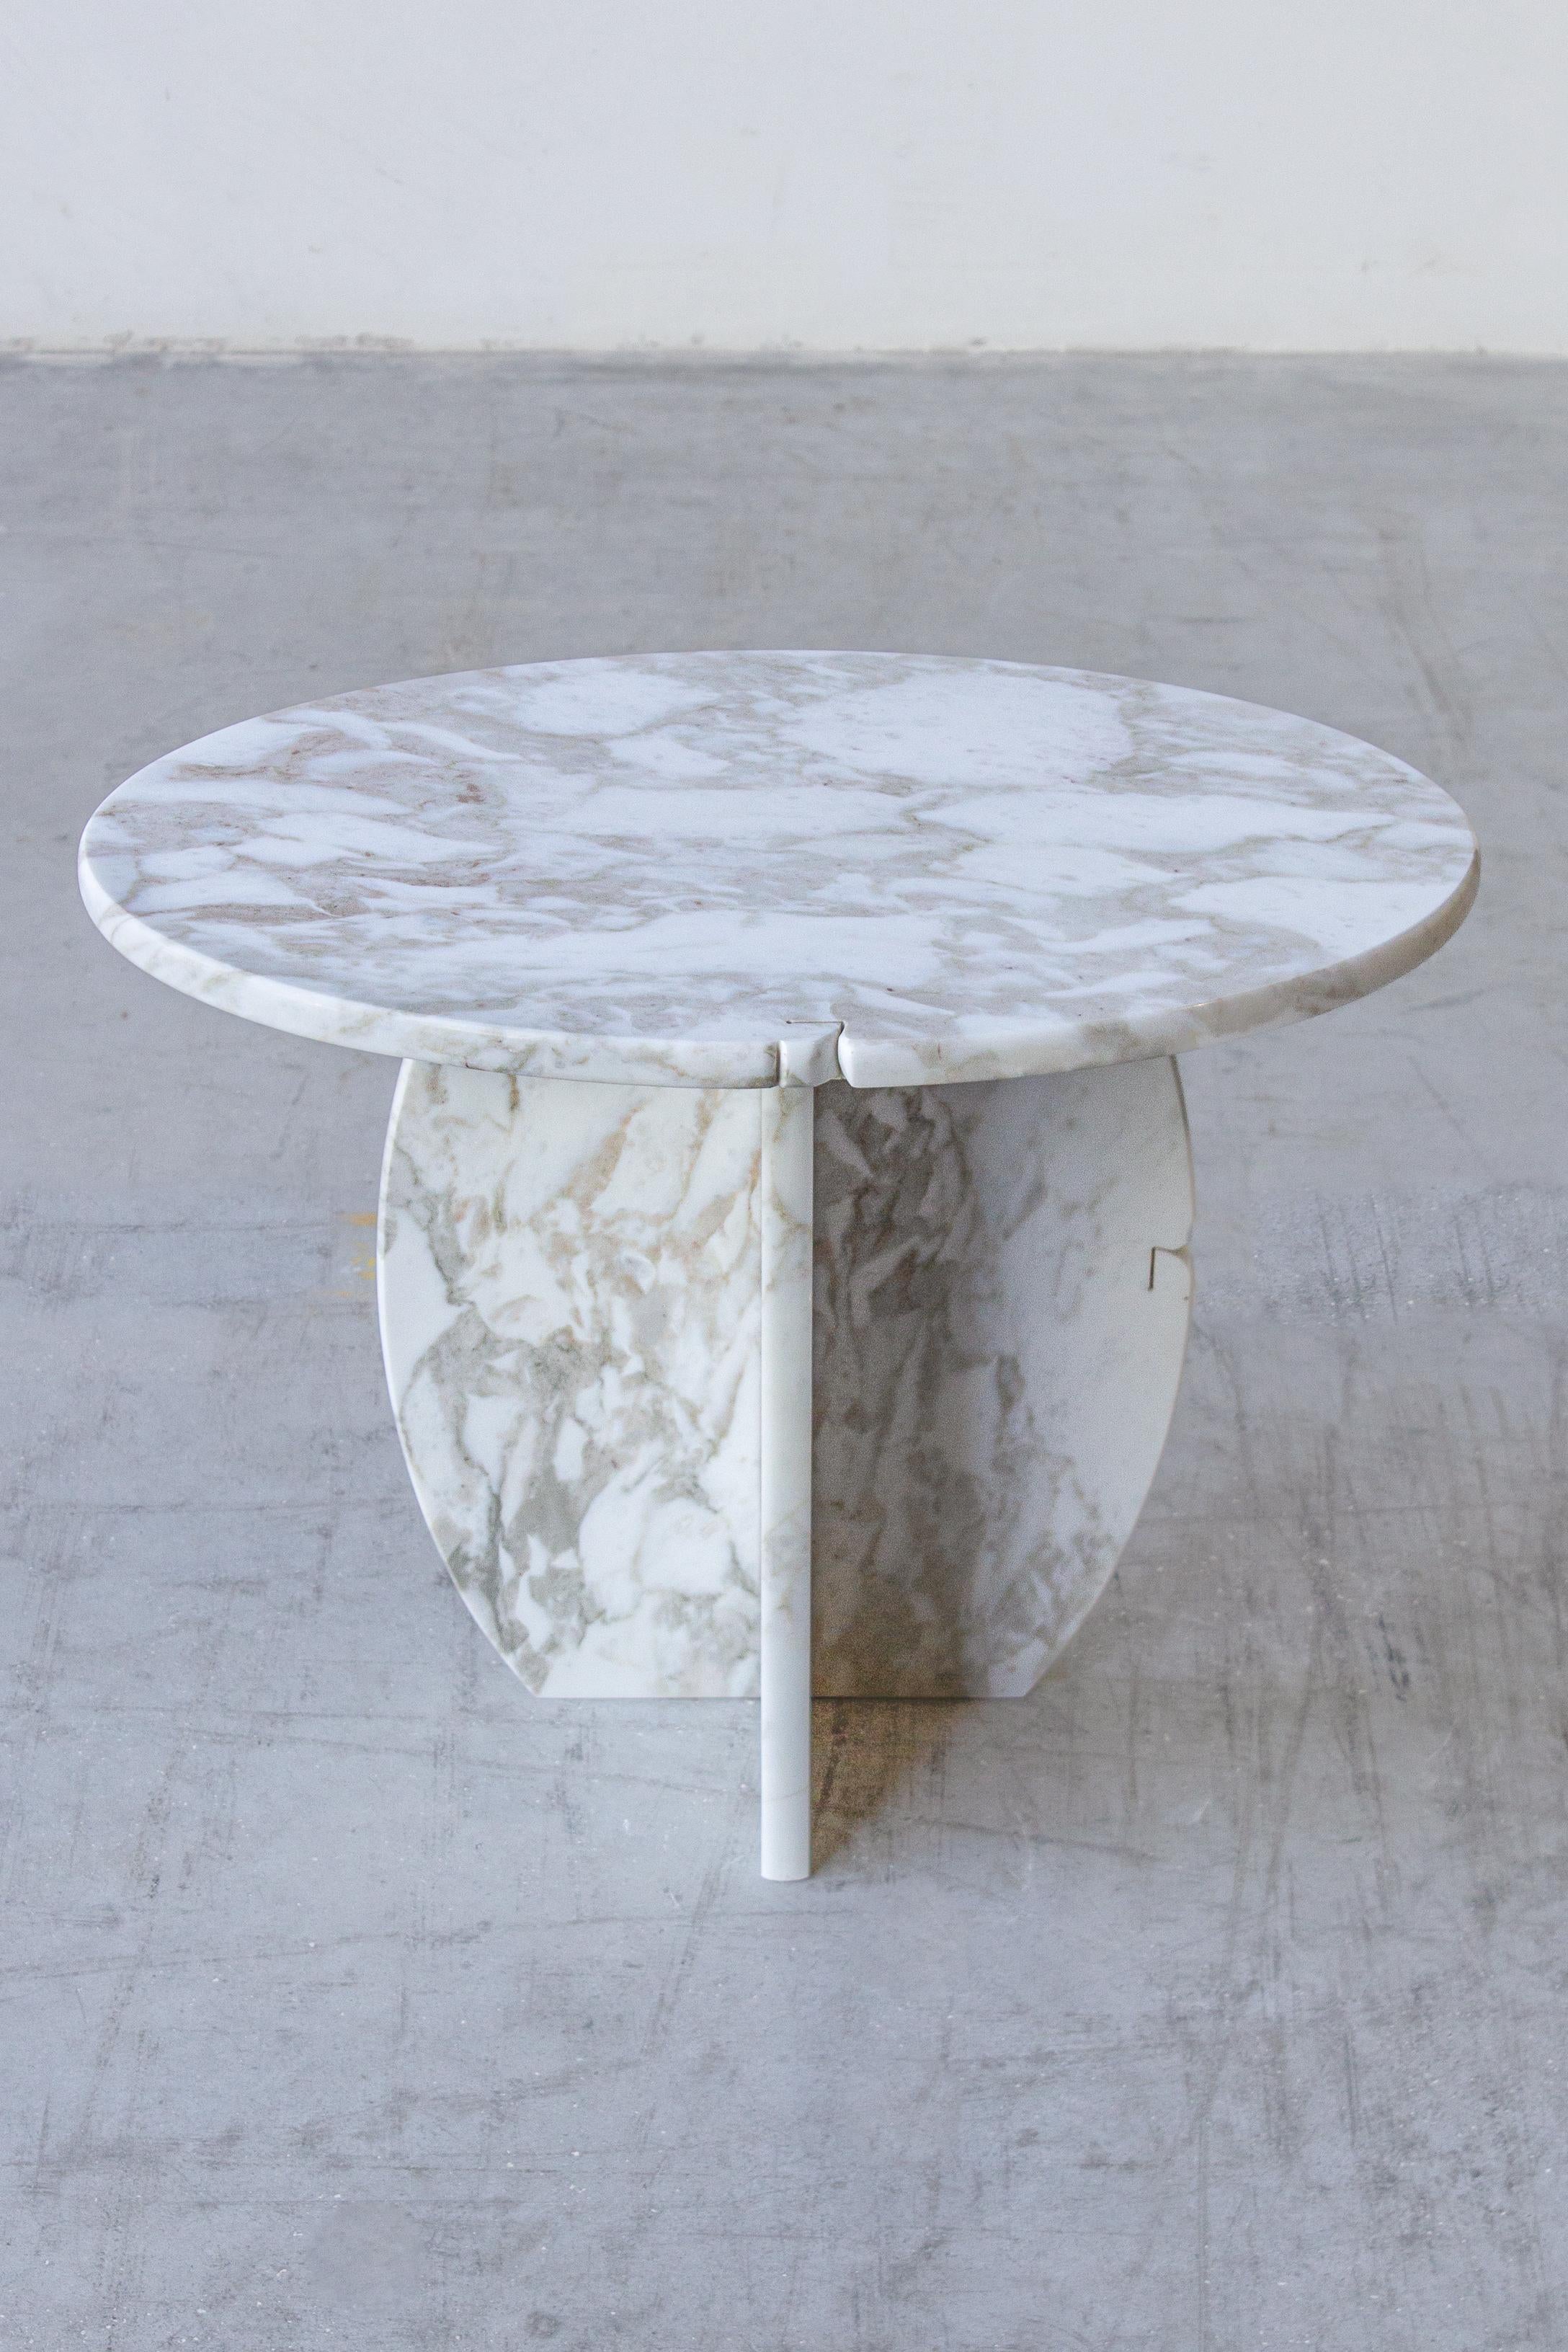 SST023 side table by Stone Stackers
Dimensions: D 34 x W 54 x H 45 cm
Materials: Calacatta Oro marble.
Weight: 19 kg

The Side table is made up of two oval shaped Calacatta Oro marble sustained by other marble off-cuts of the same marble.

The Stone